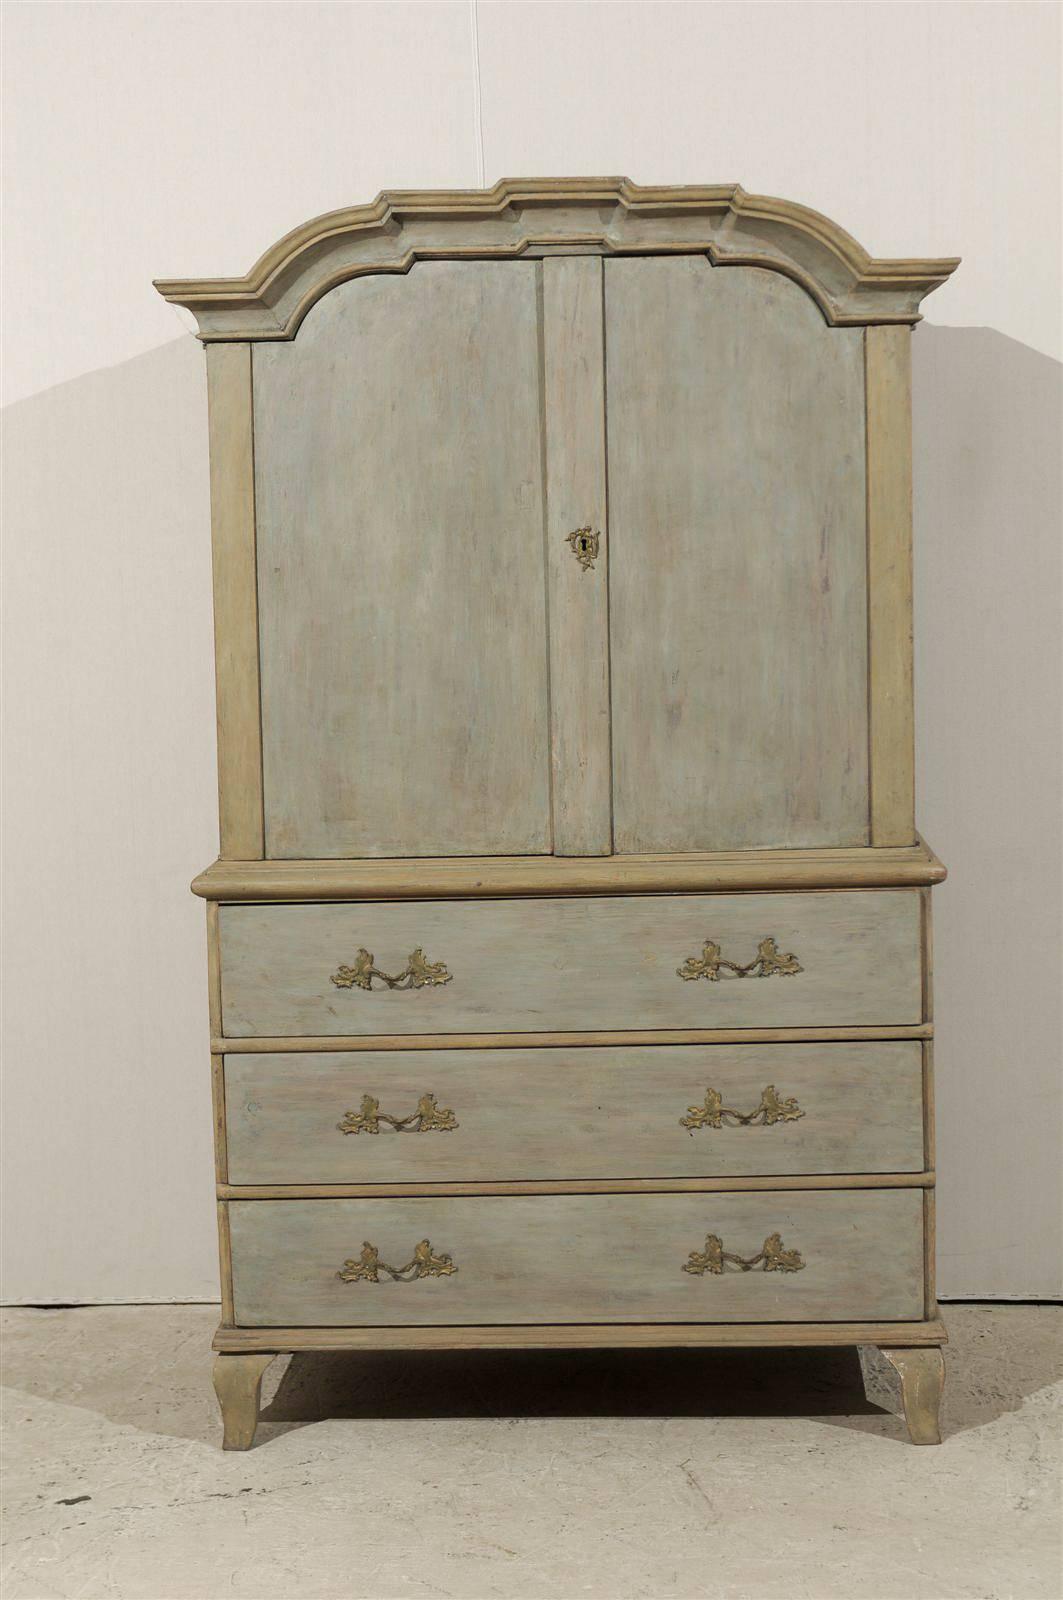 An exquisite Swedish period Rococo painted wood cabinet, circa 1760. This cabinet / linen press features two upper doors over three dovetailed drawers as well as a profiled pediment. It is raised on small cabriole feet. The color is light blue with